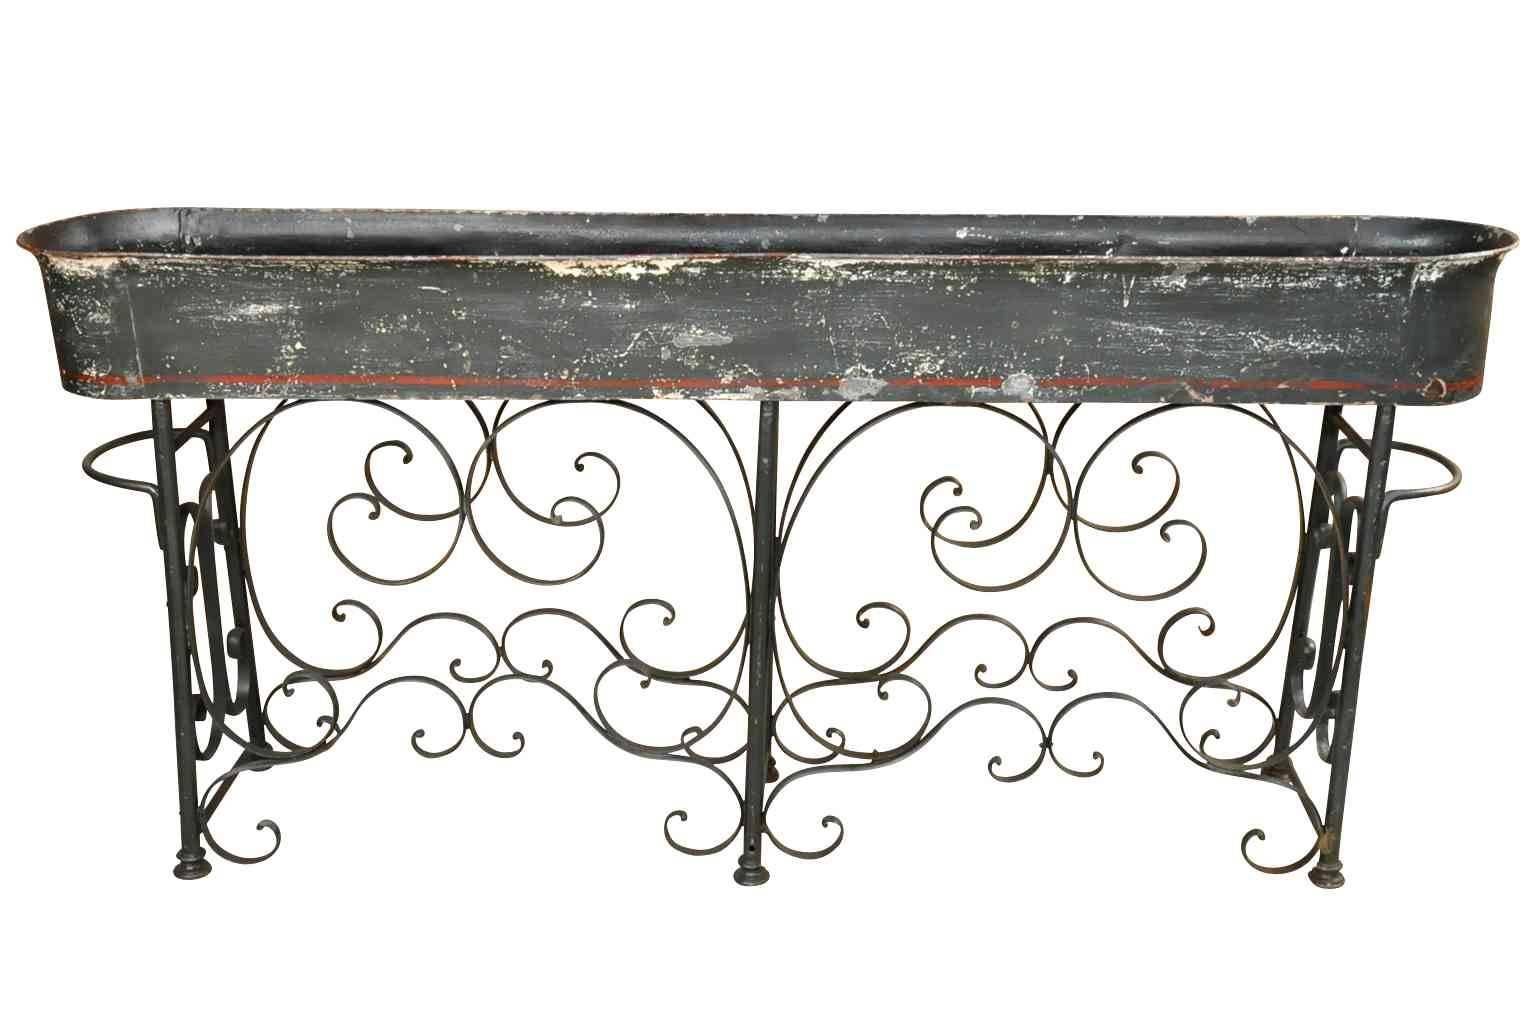 A wonderful grand scale French Jardinière stand in painted iron and zinc. A terrific addition to any garden, porch or solarium.